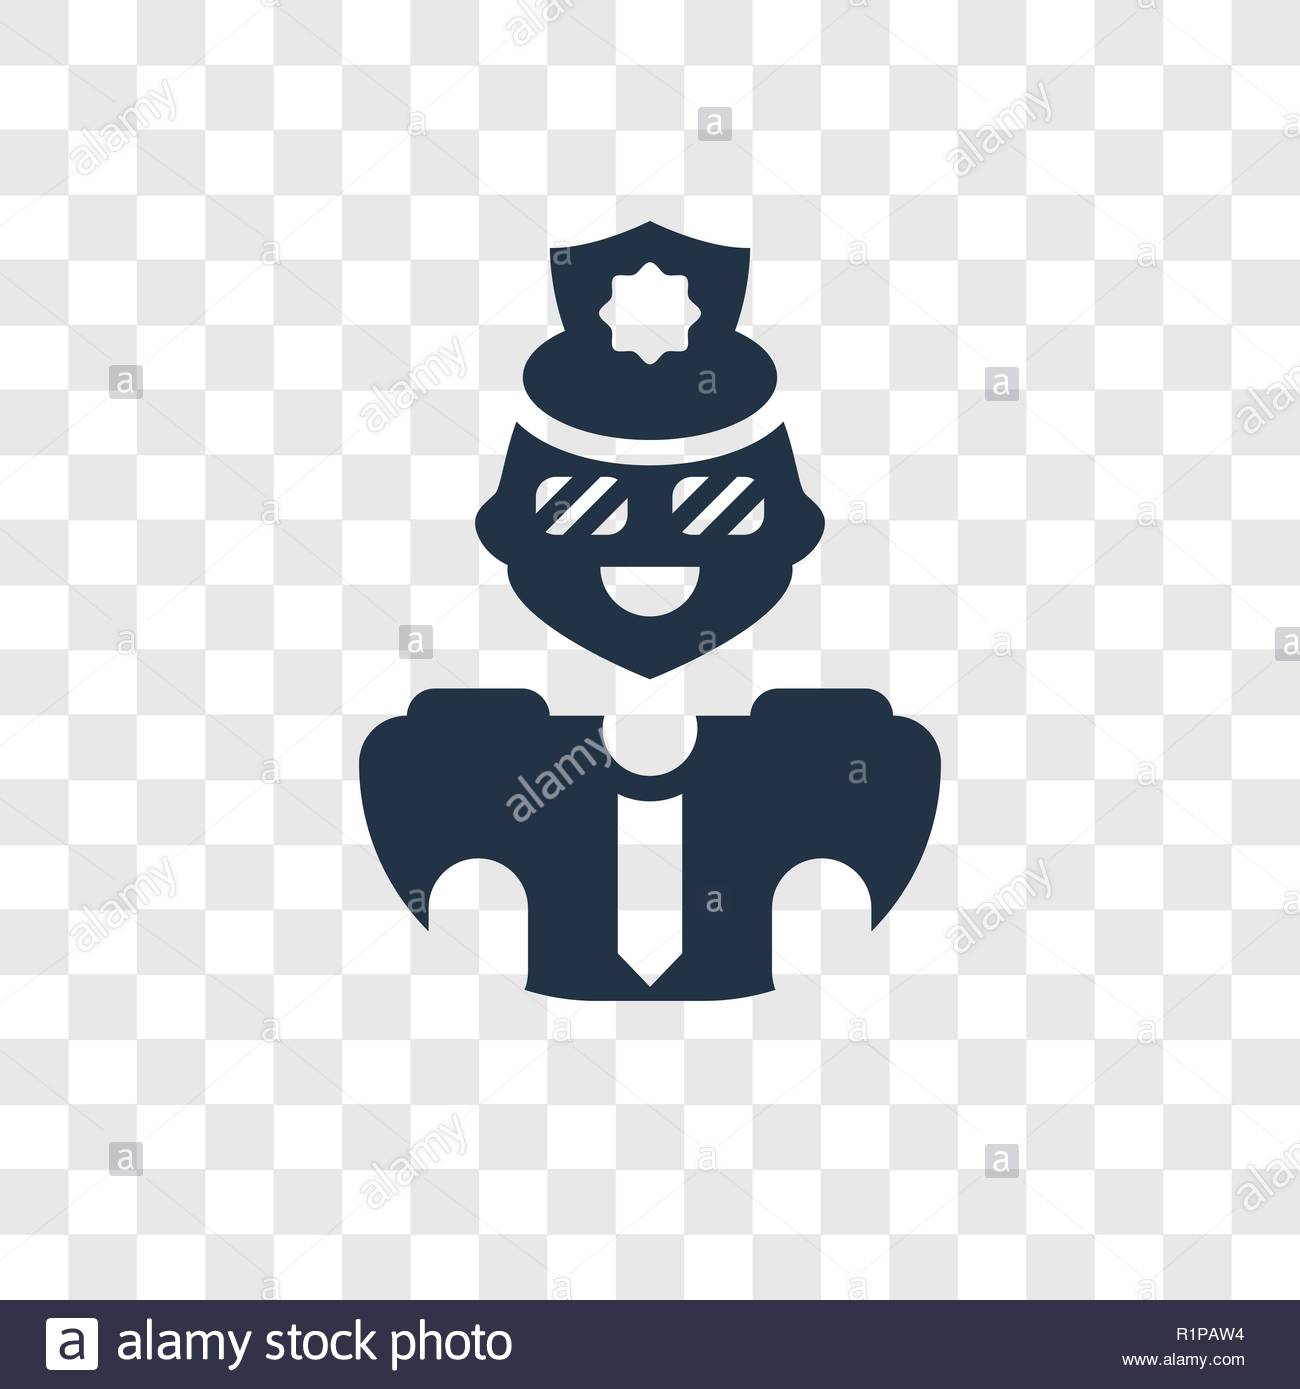 Policeman Vector Icon Isolated On Transparent Background